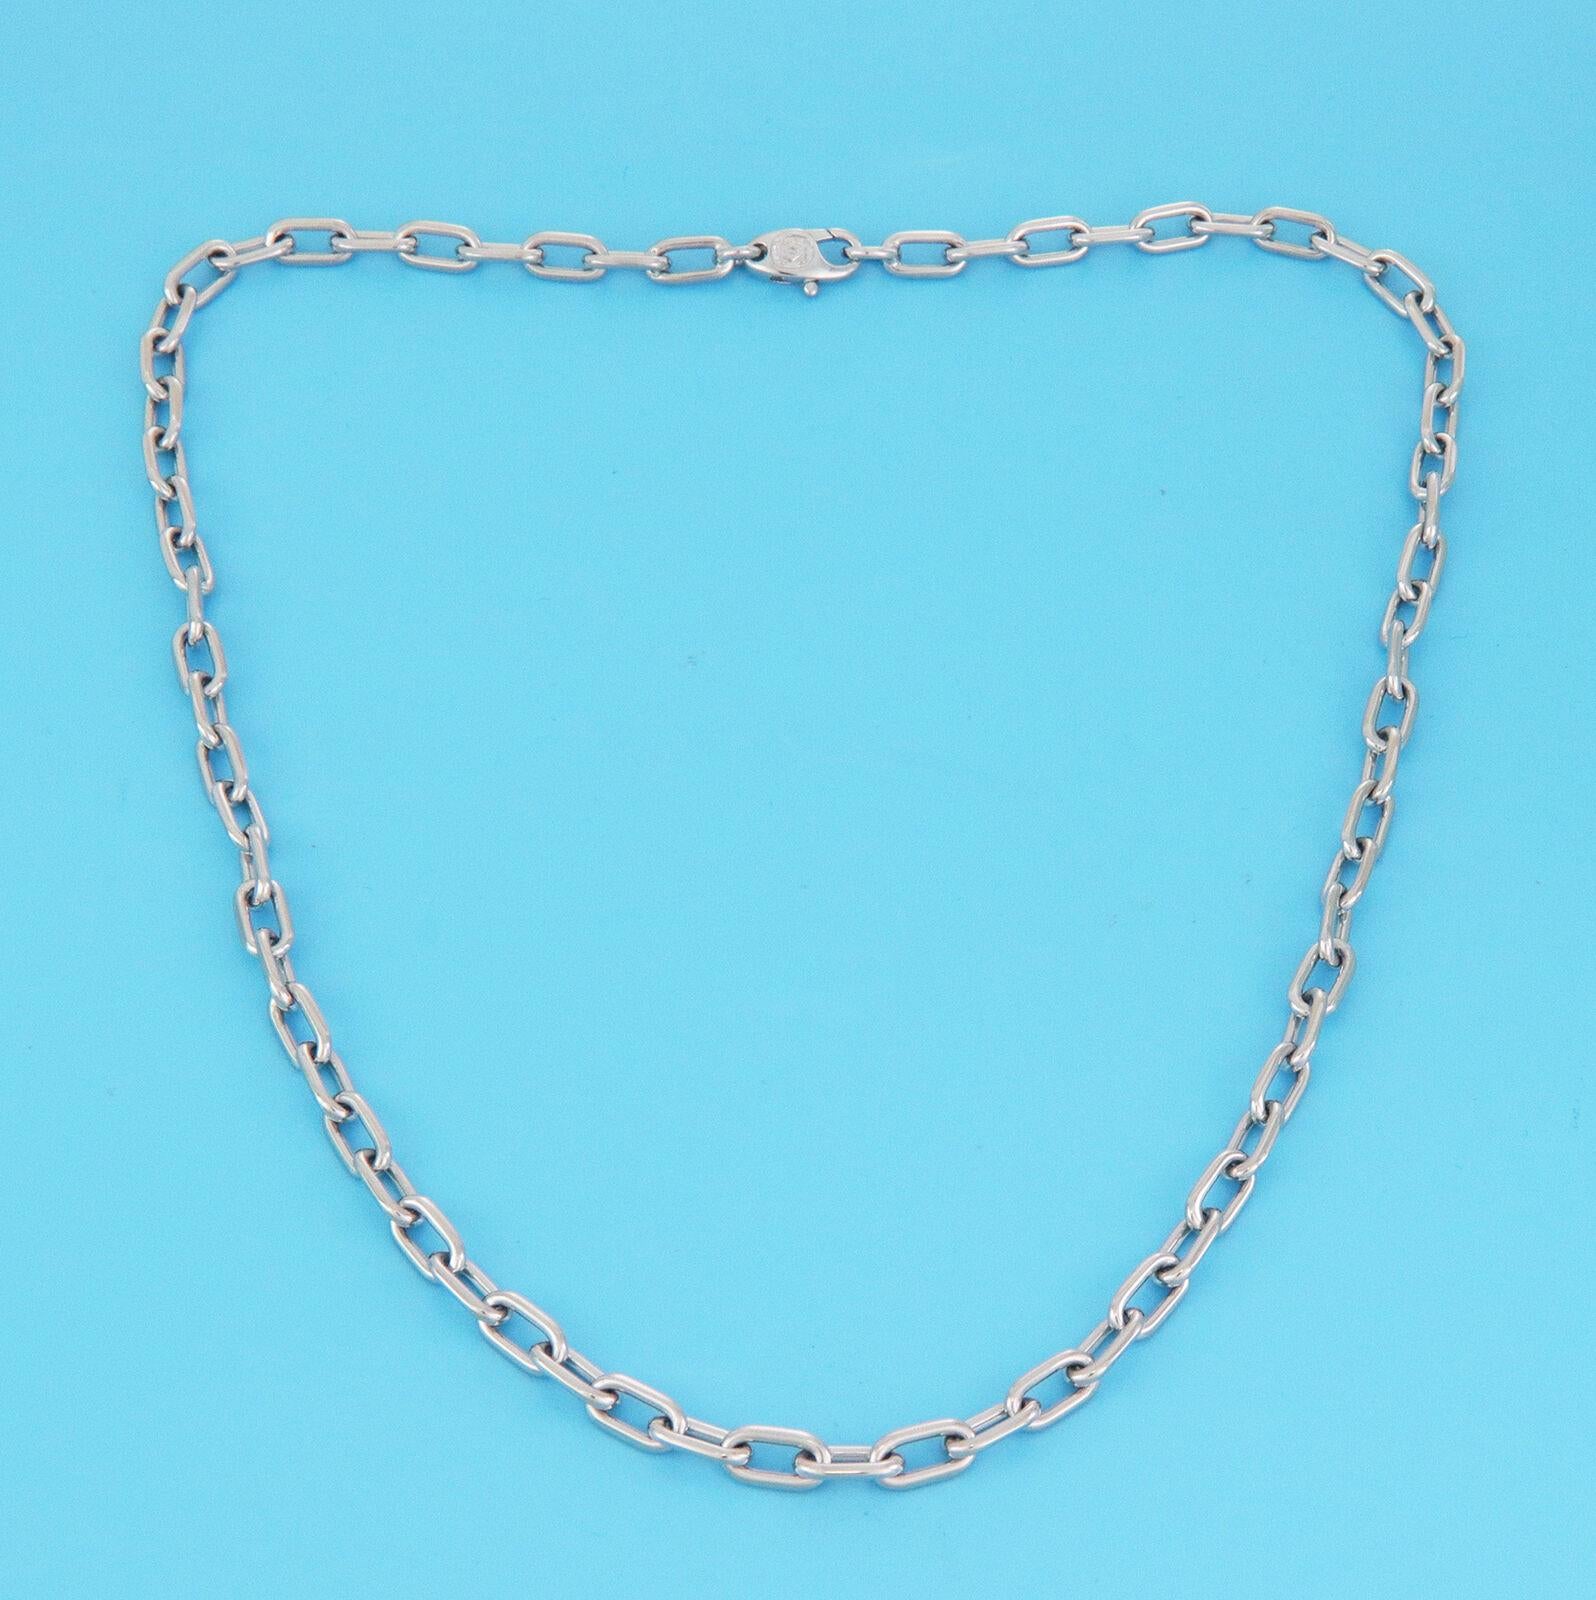 From the Spartacus Collection by Cartier, this bold chain is crafted from 18k white gold in a high polished finish. The necklace features long solid oval links and fastens with a large lobster clasp with the double C logo.  It has the designer